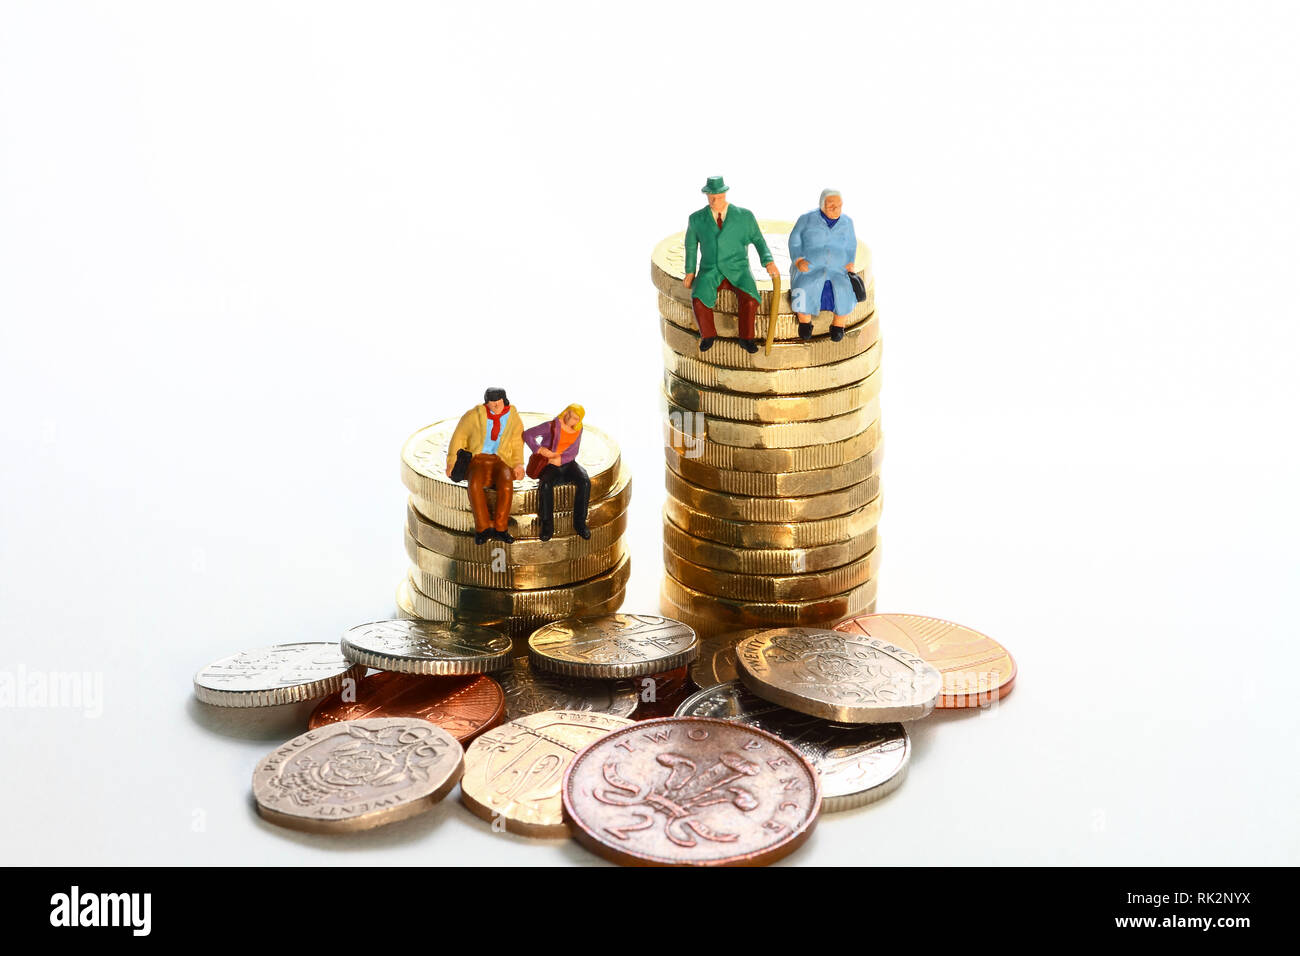 Conceptual diorama image of a miniature figure retired couple and young couple sat on a stack of pound coins Stock Photo